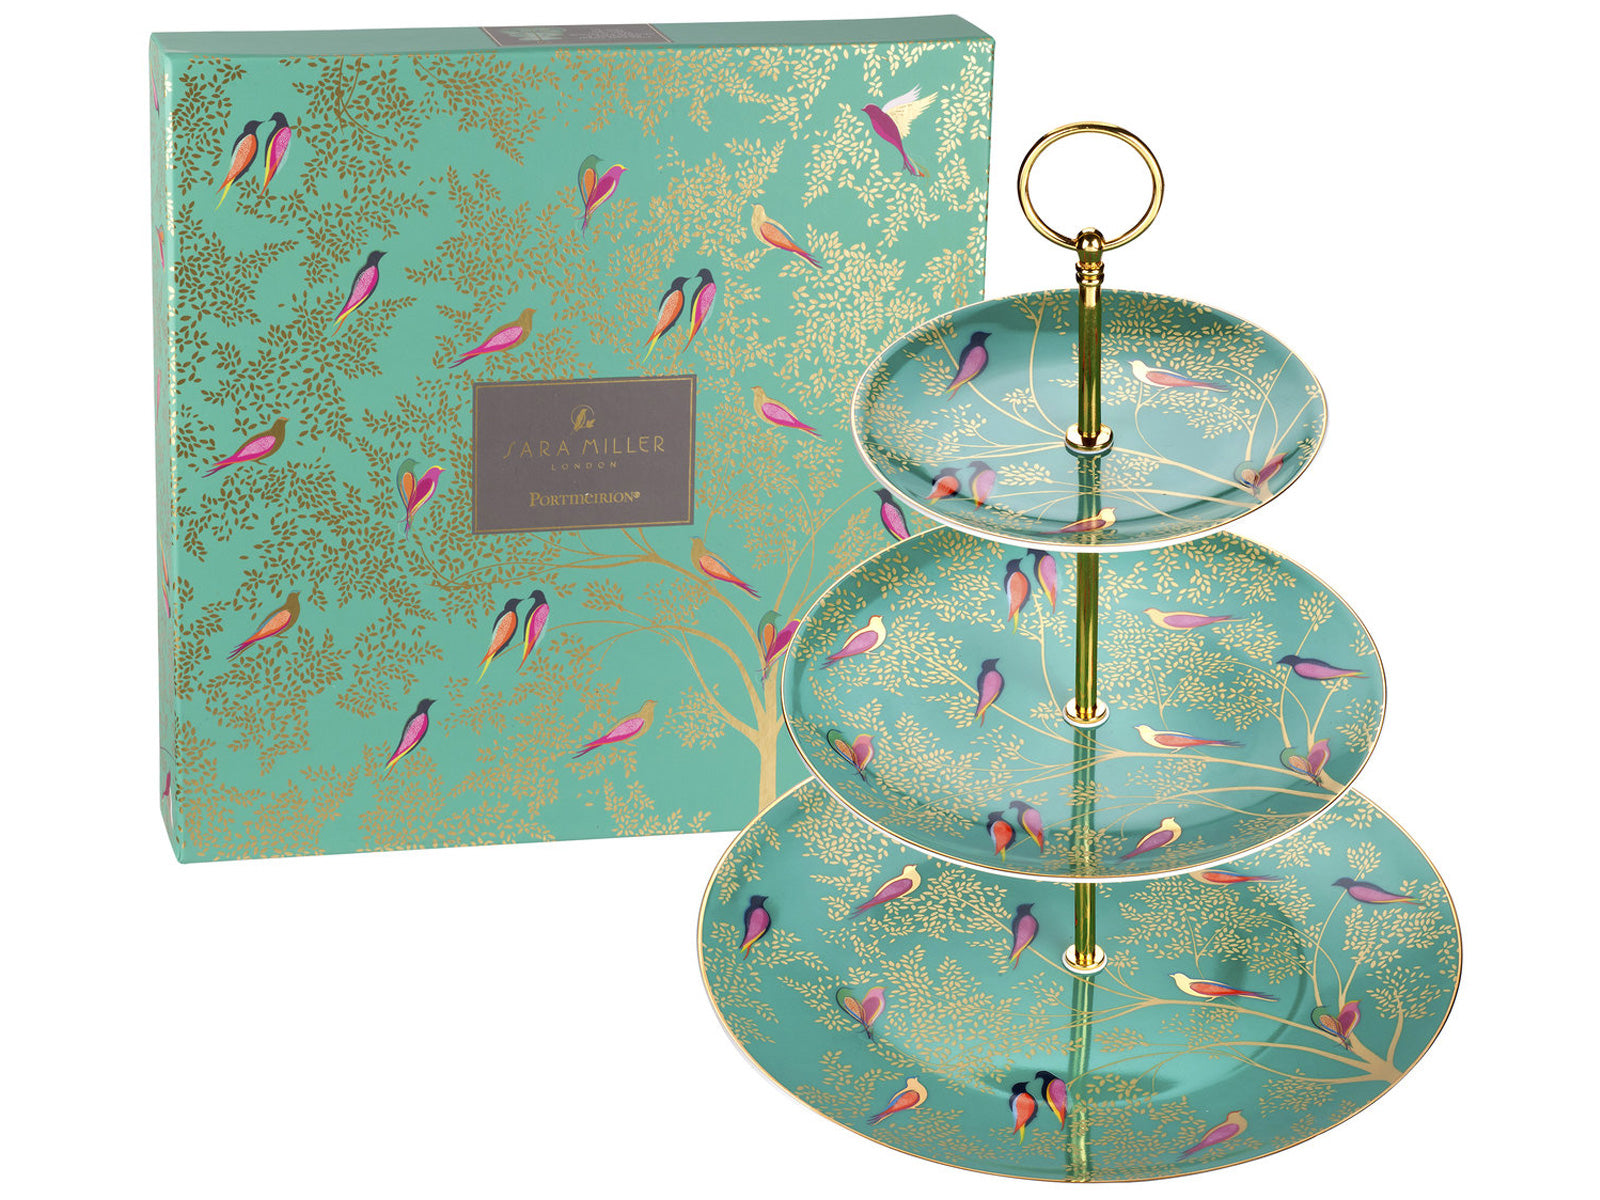 This three-tier cake stand is decorated with a green transfer featuring gold foliage and brightly coloured birds. the connecting rods are gold, with a loop at the top for ease of carrying.